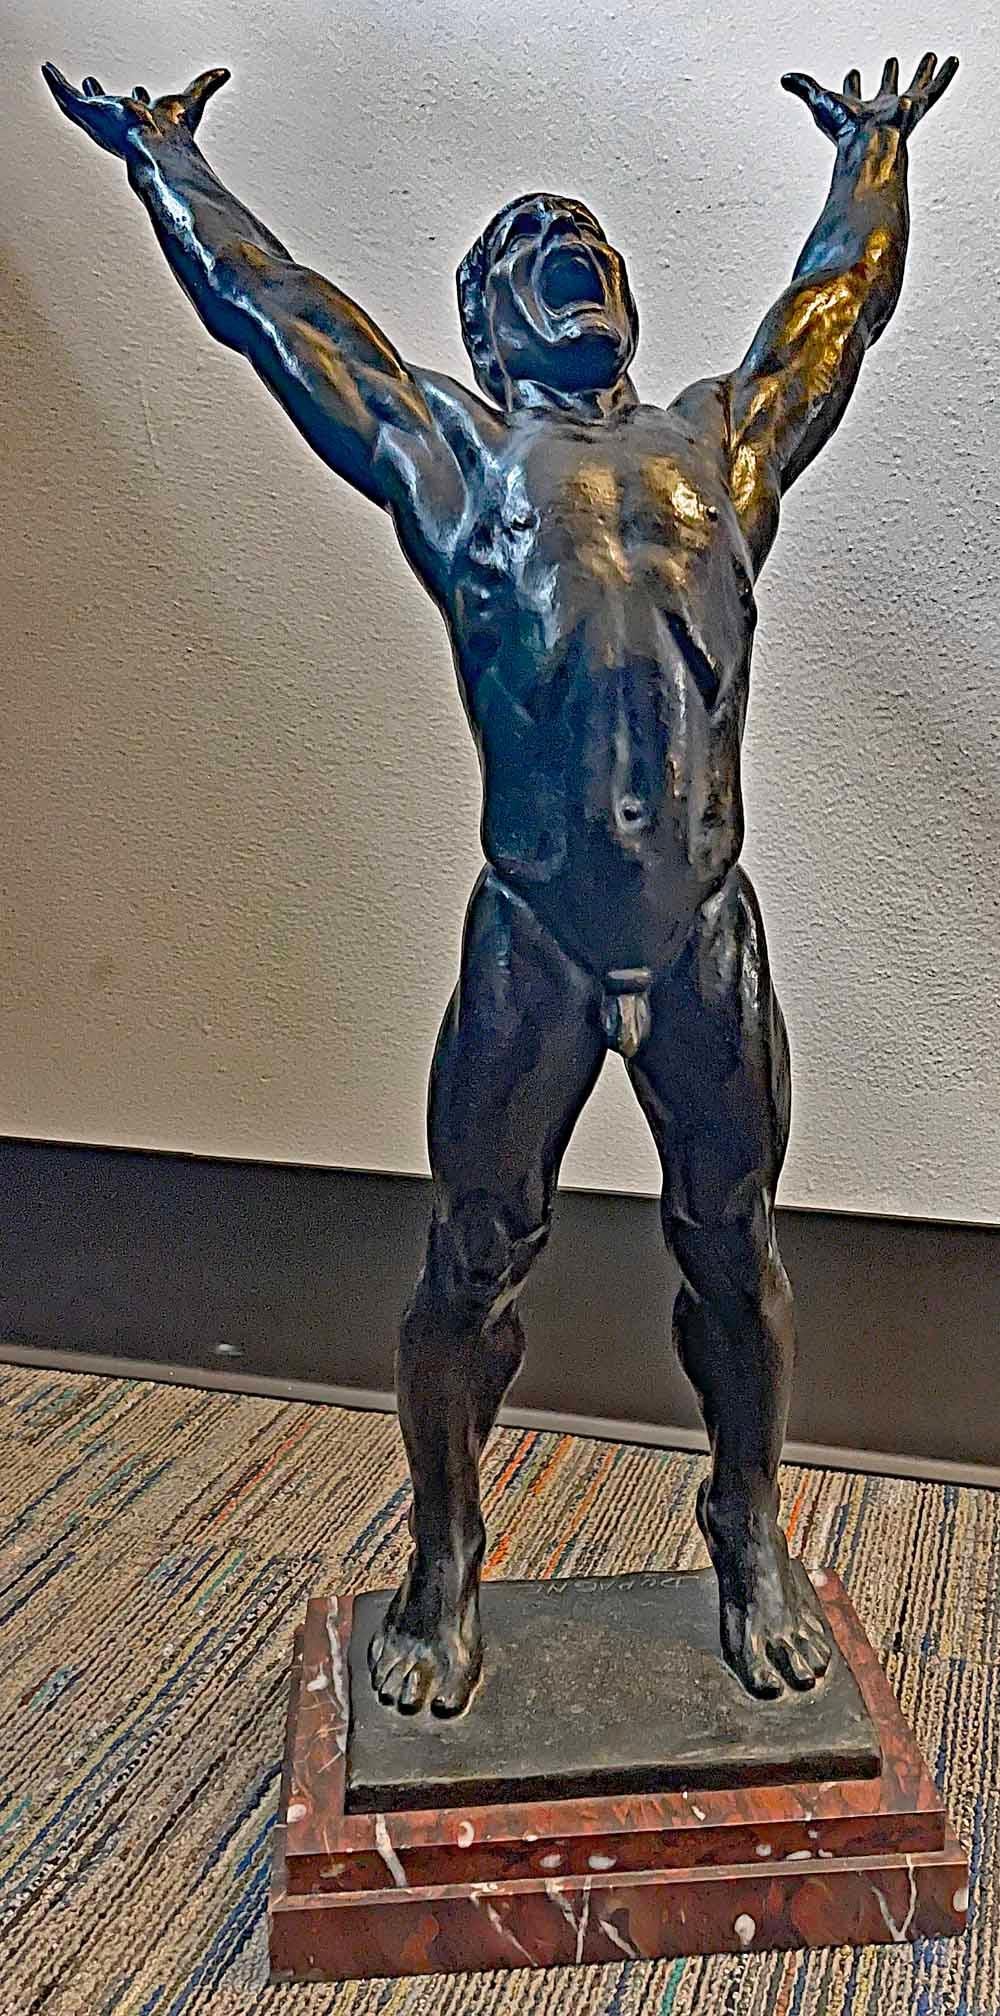 Extraordinarily powerful, and very rare, this large bronze sculpture of a nude male figure by Arthur Dupagne shows him stretching and straining upwards, his head rolled back and shouting in exultation.  It was cast in 1944, when the Nazis were being